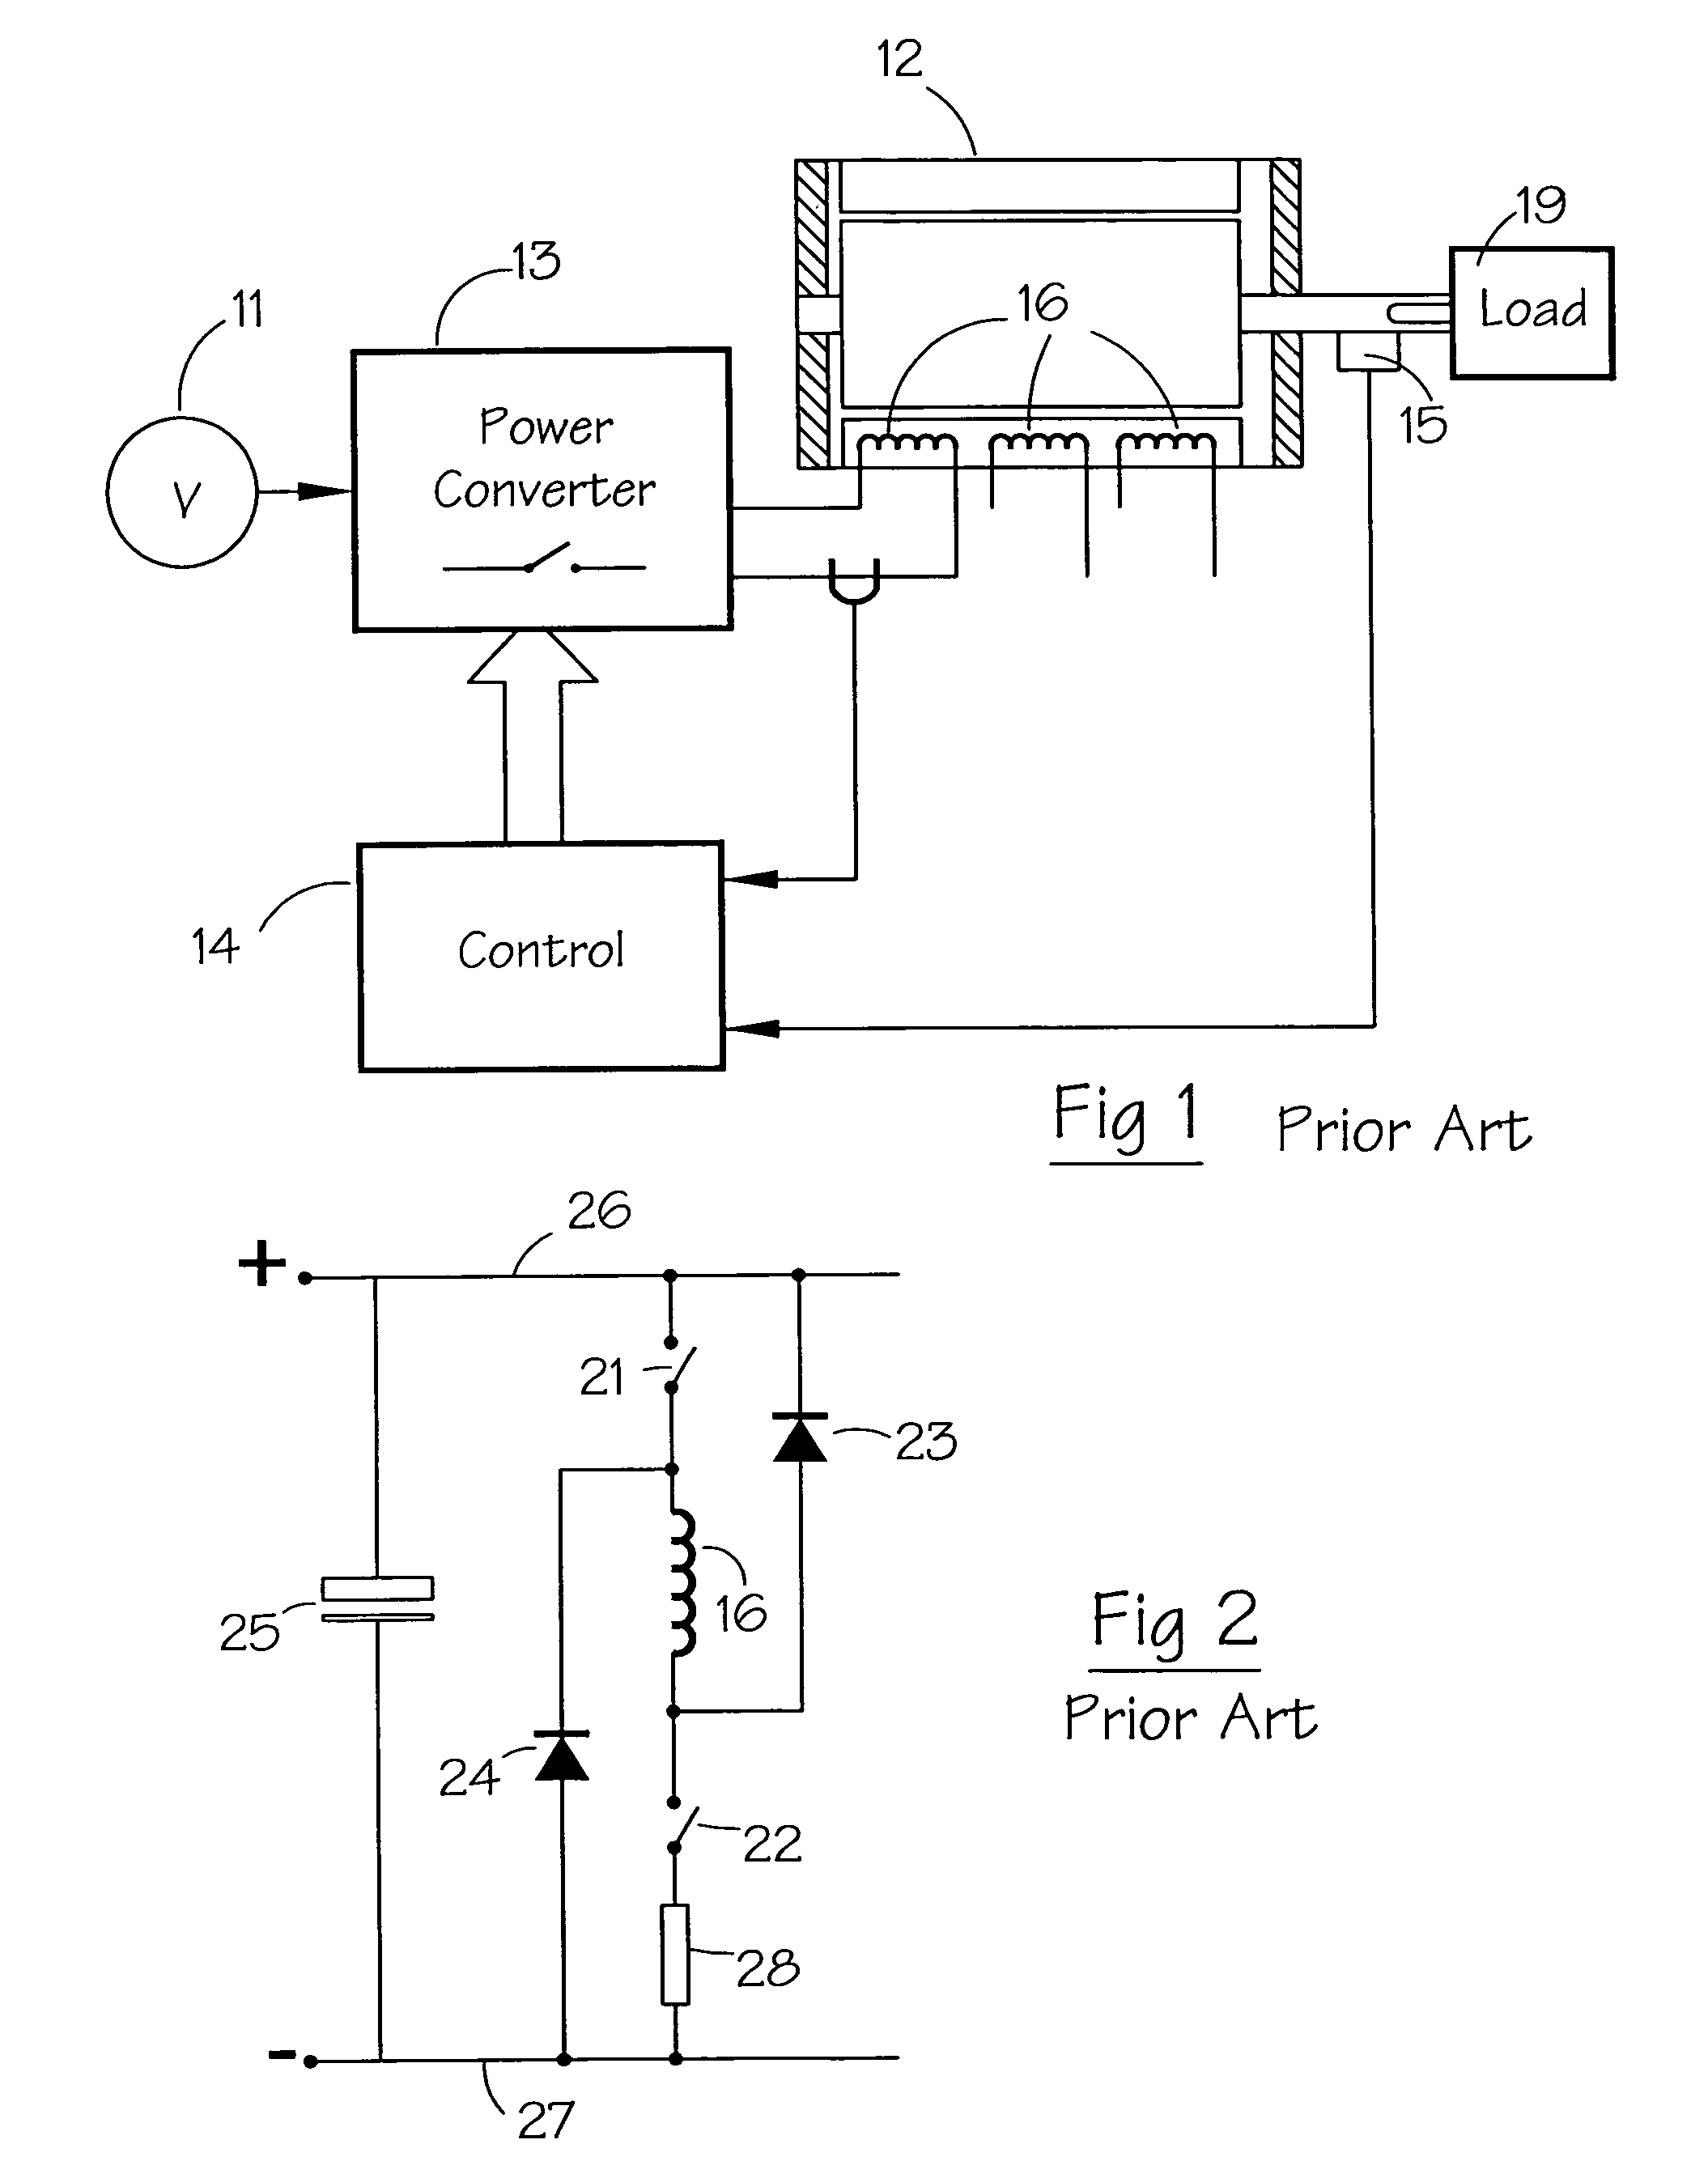 Rotor position determination in a switched reluctance machine